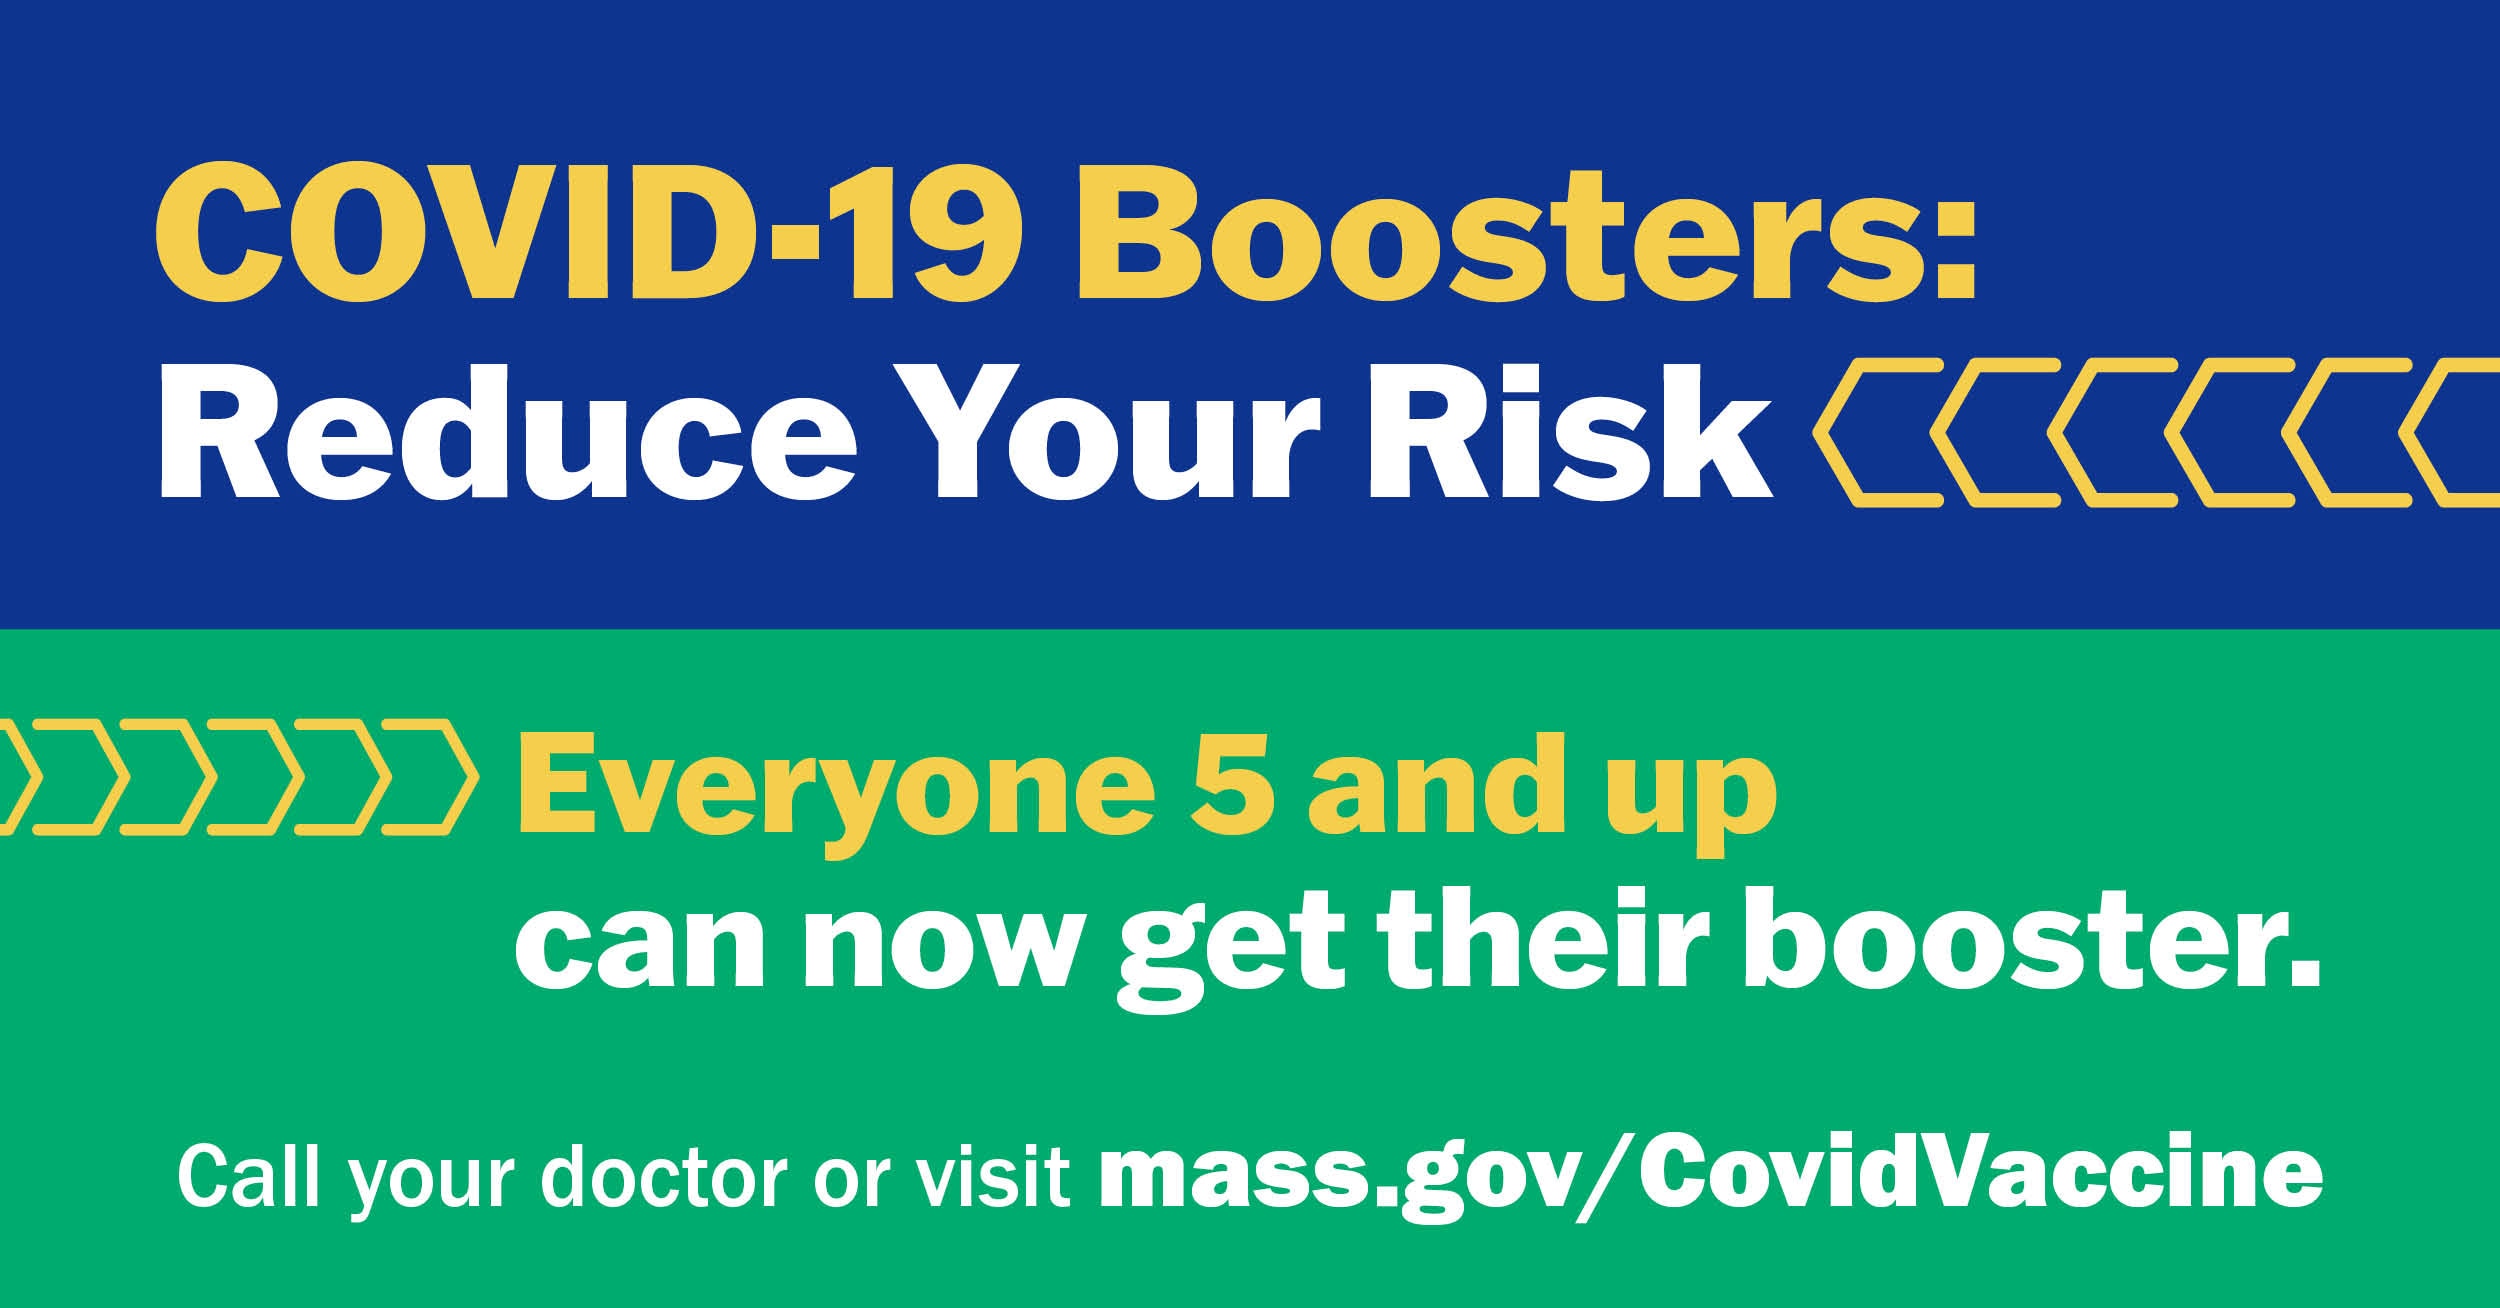 Boosters reduce your risk promotional image for social media. Schedule your appointment at mass.gov/covidvaccine.